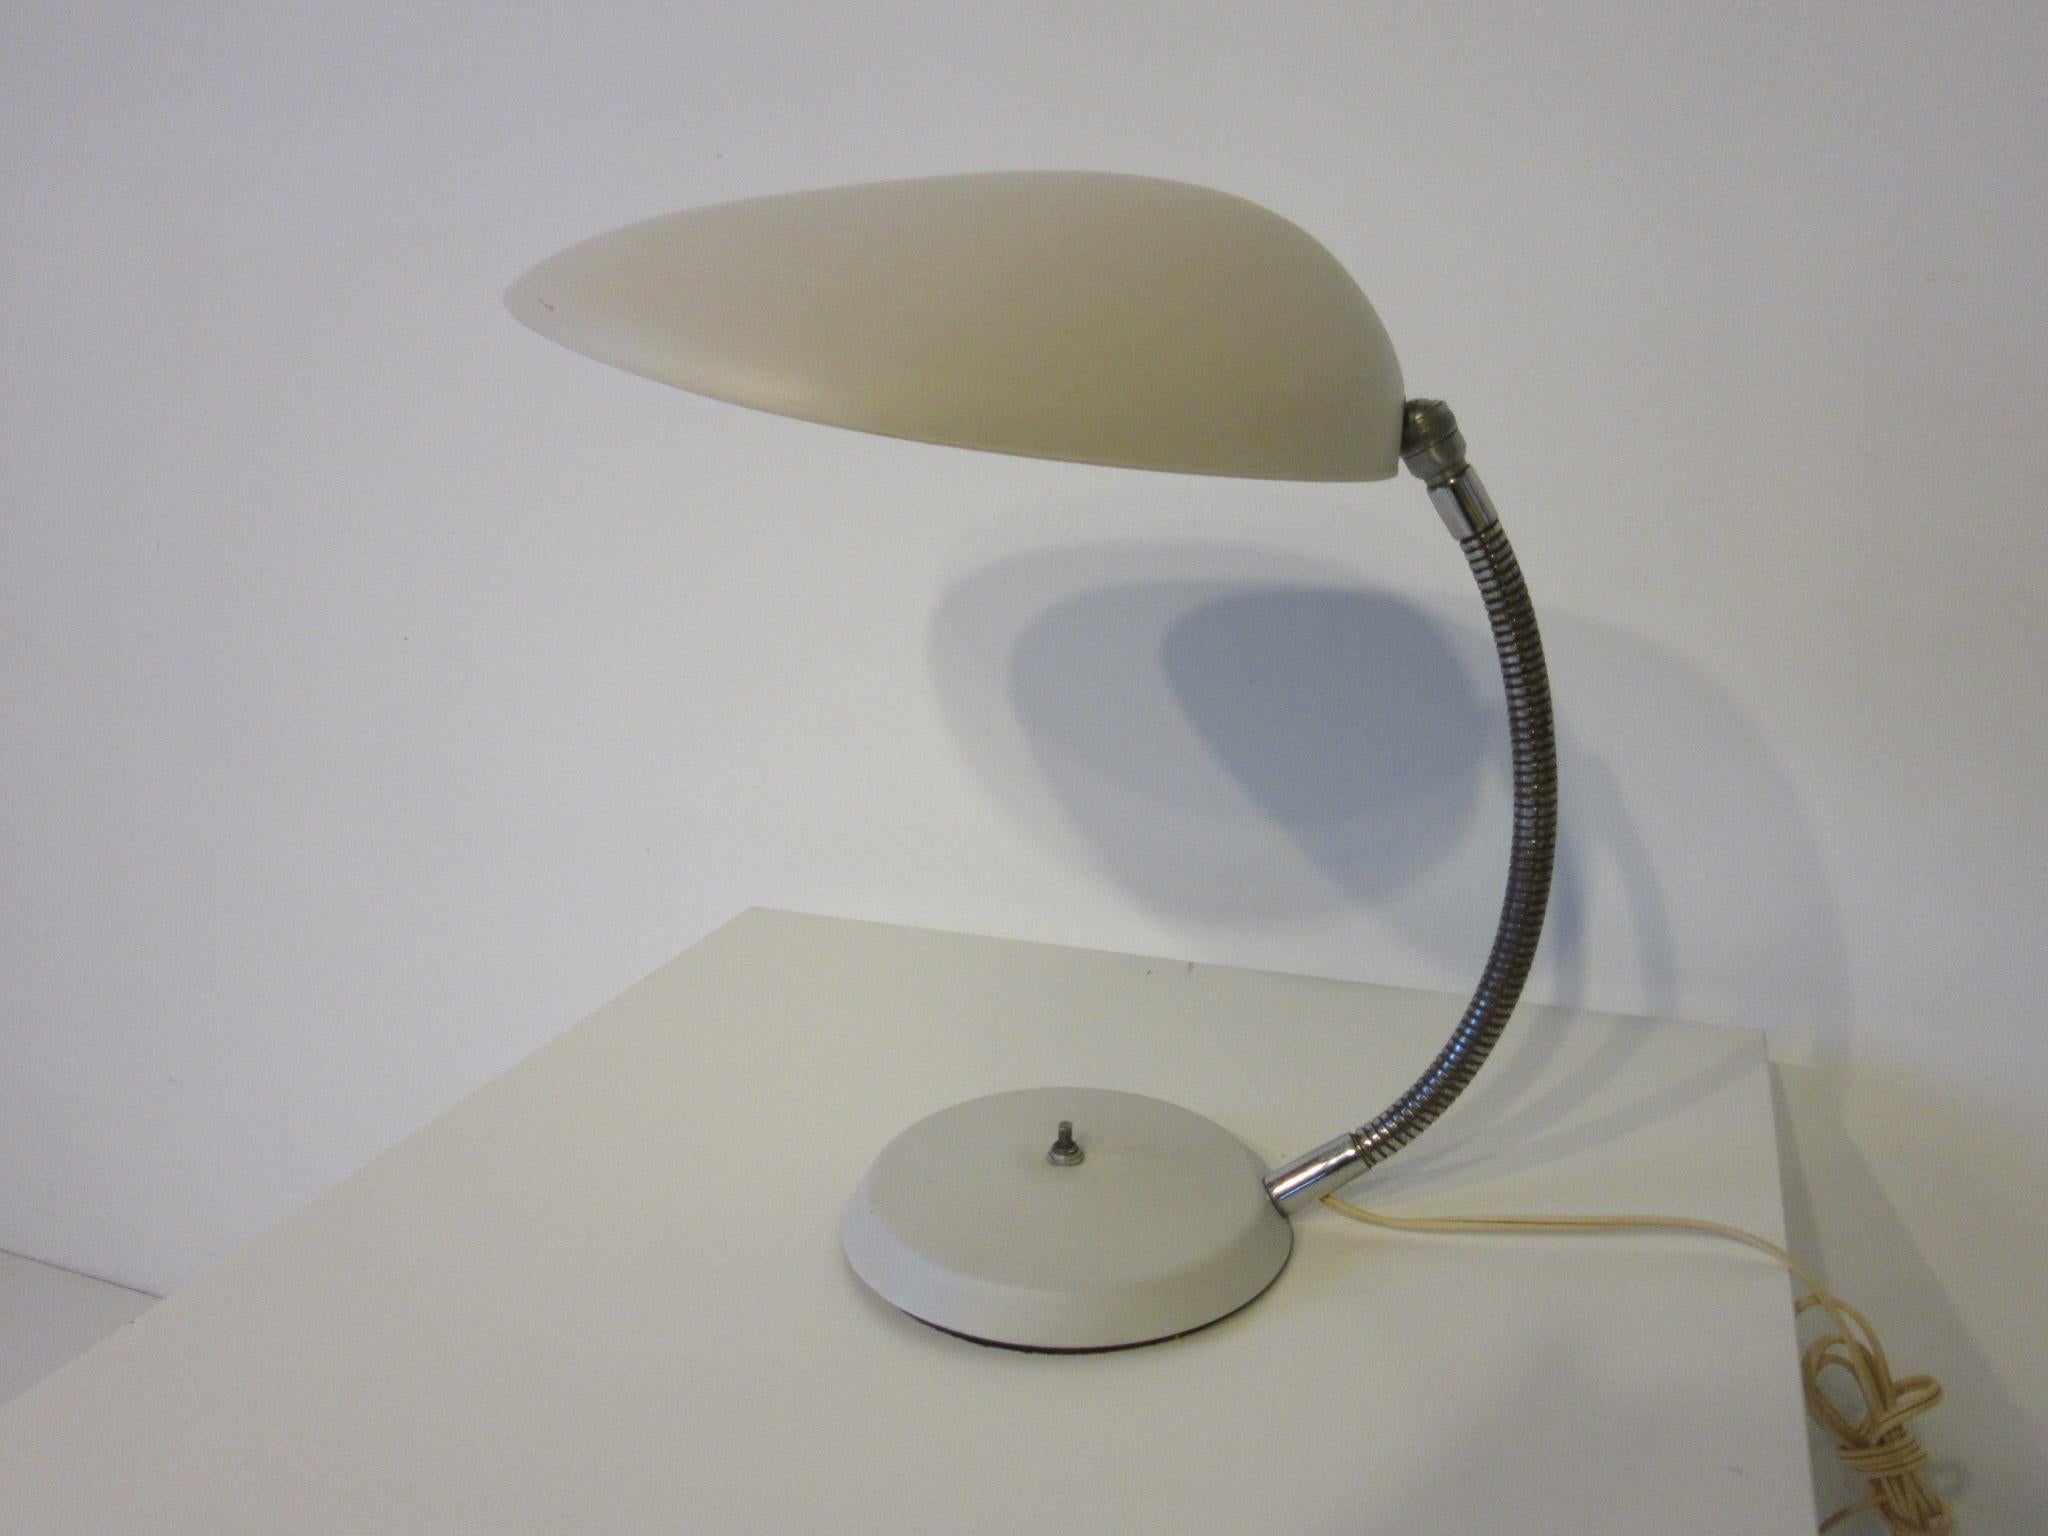 A iconic midcentury cobra table lamp in a satin off white finish on the metal shade and base with push button switch and flexible satin chrome arm. Manufactured by the Ralph O. Smith Modern Lighting Company model number 901 - T from designer Greta